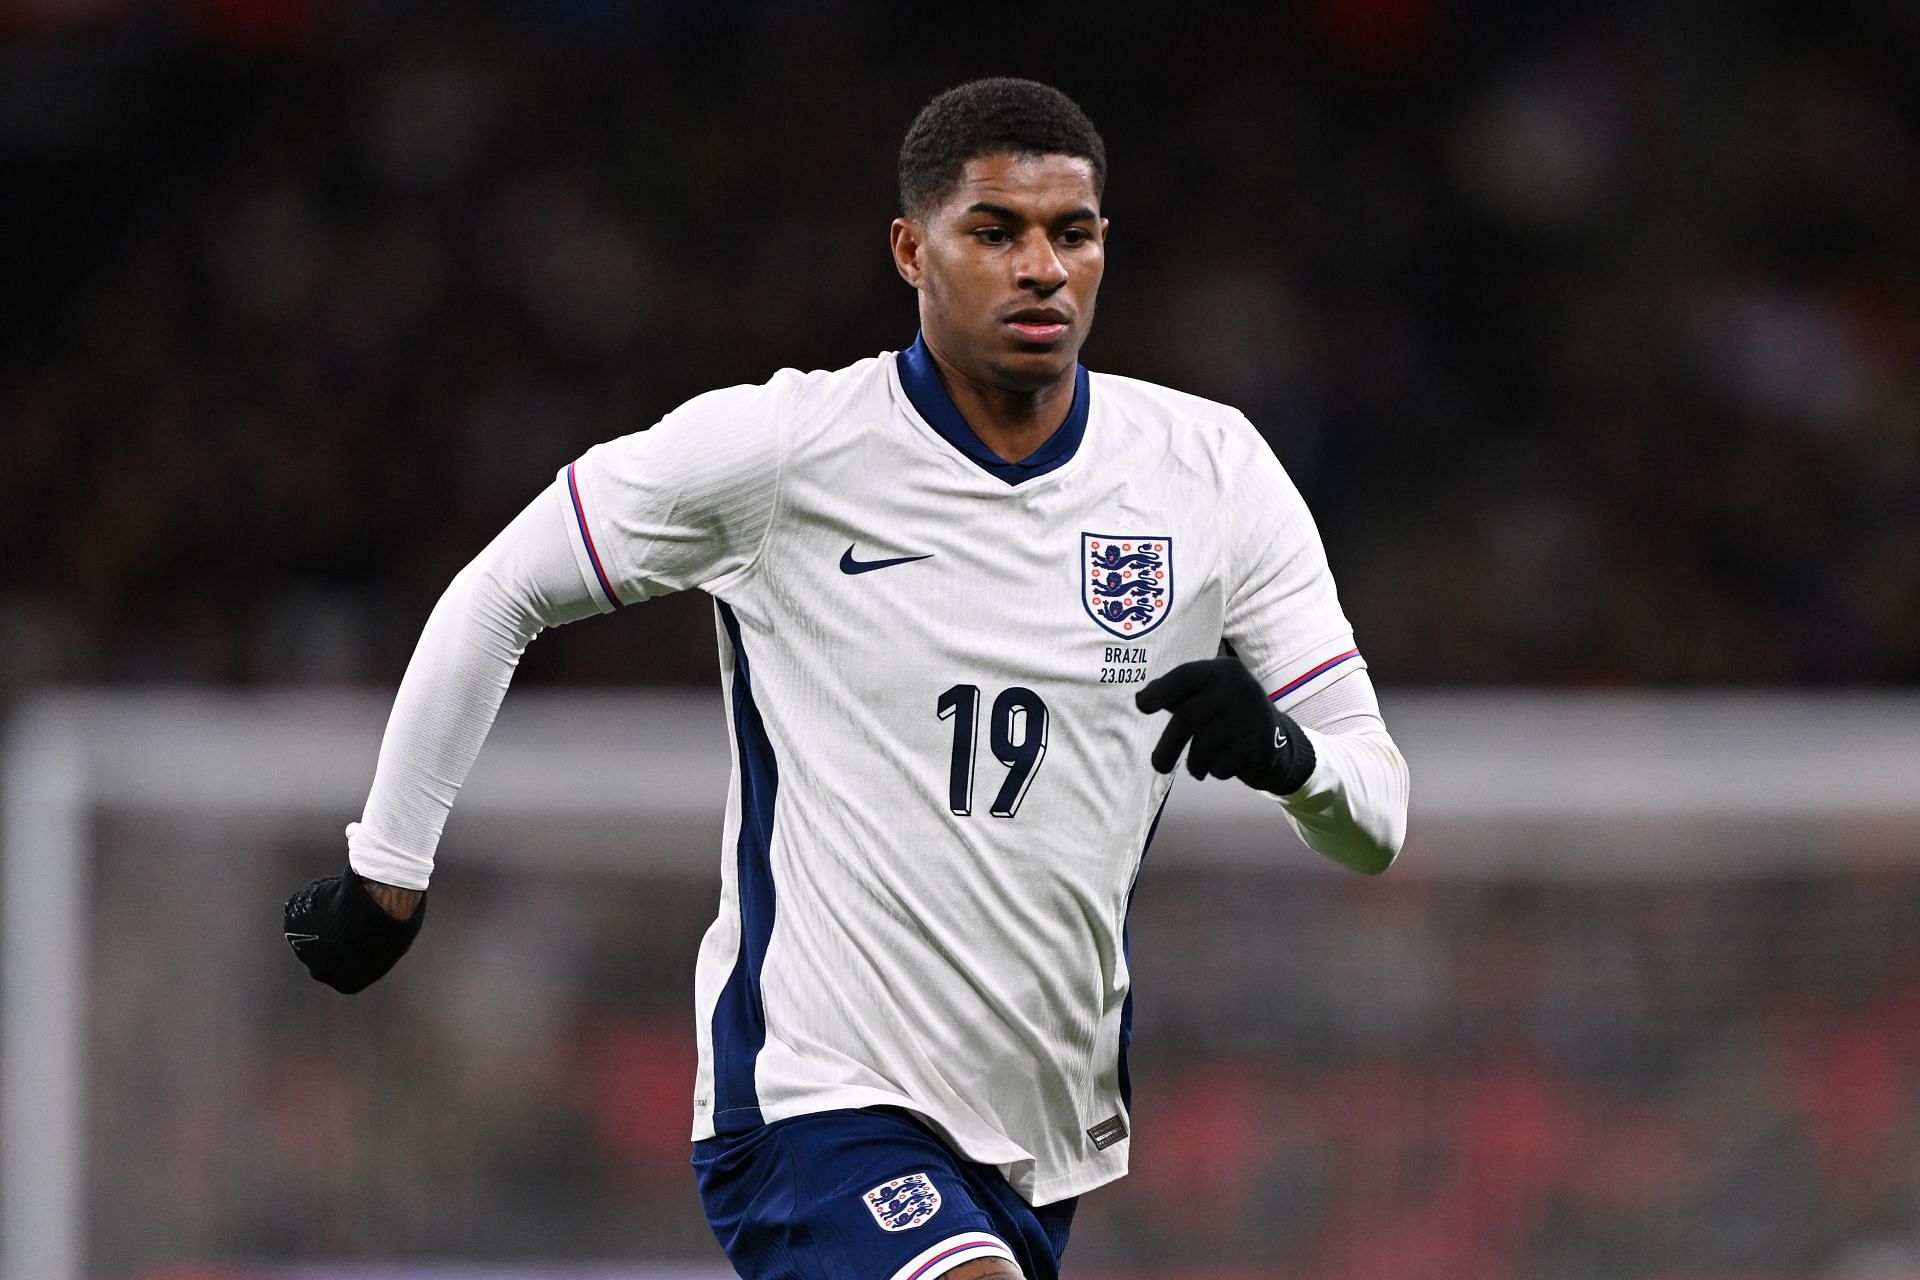 Marcus Rashford will start on the bench for England.